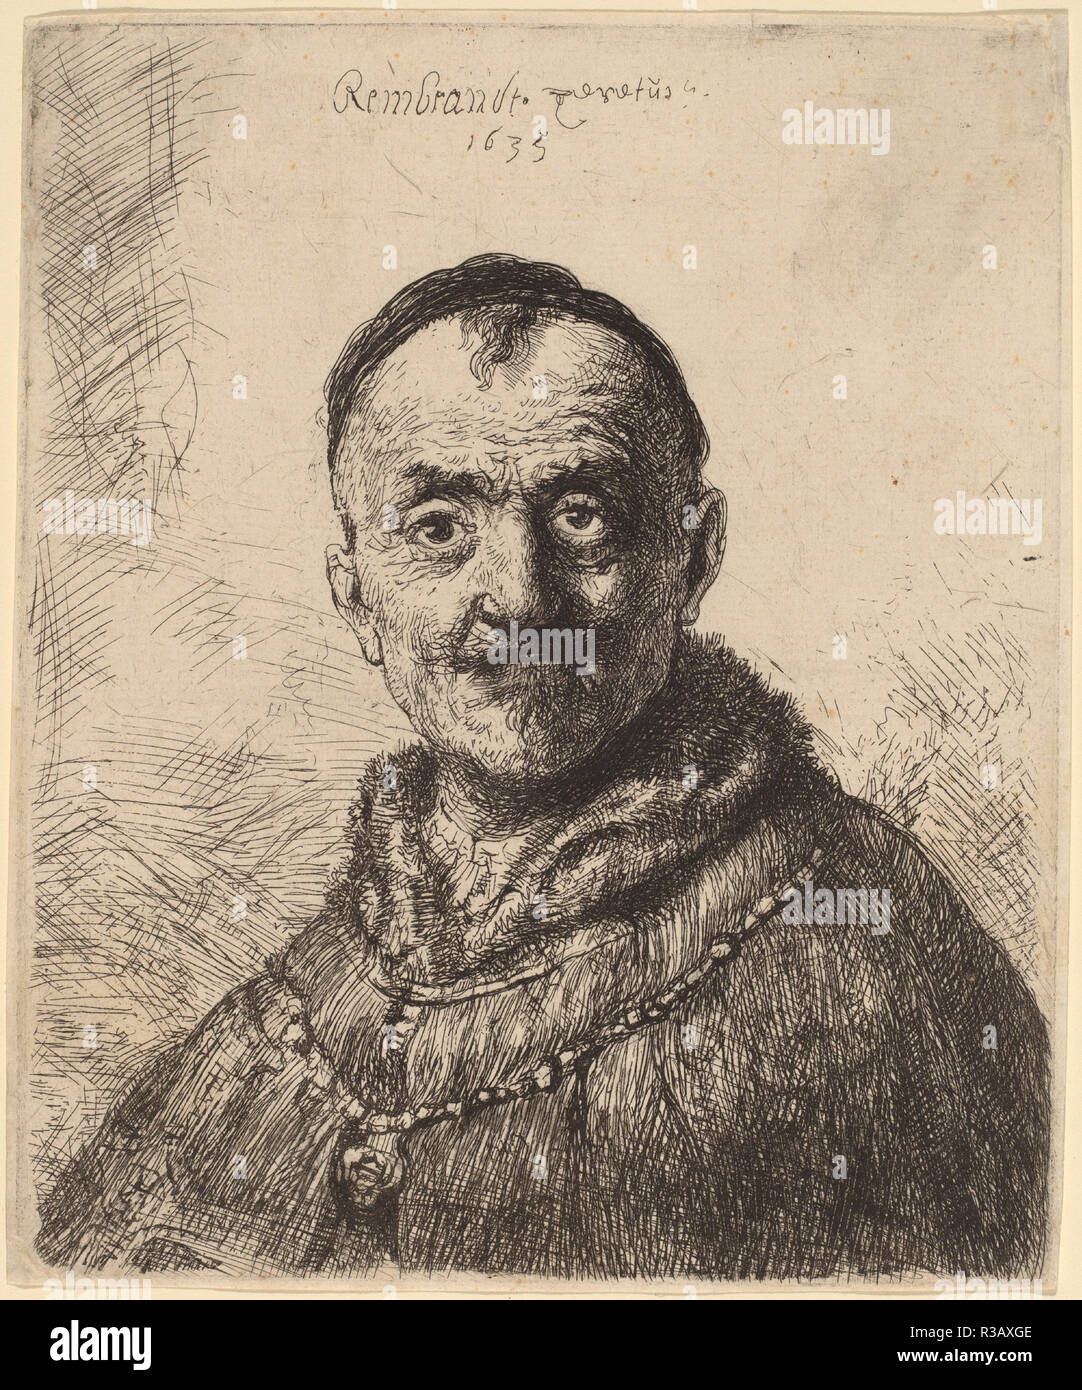 The First Oriental Head. Dated: 1635. Medium: etching, with some drypoint. Museum: National Gallery of Art, Washington DC. Author: Rembrandt van Rijn and Studio of Rembrandt van Rijn after Jan Lievens. Stock Photo